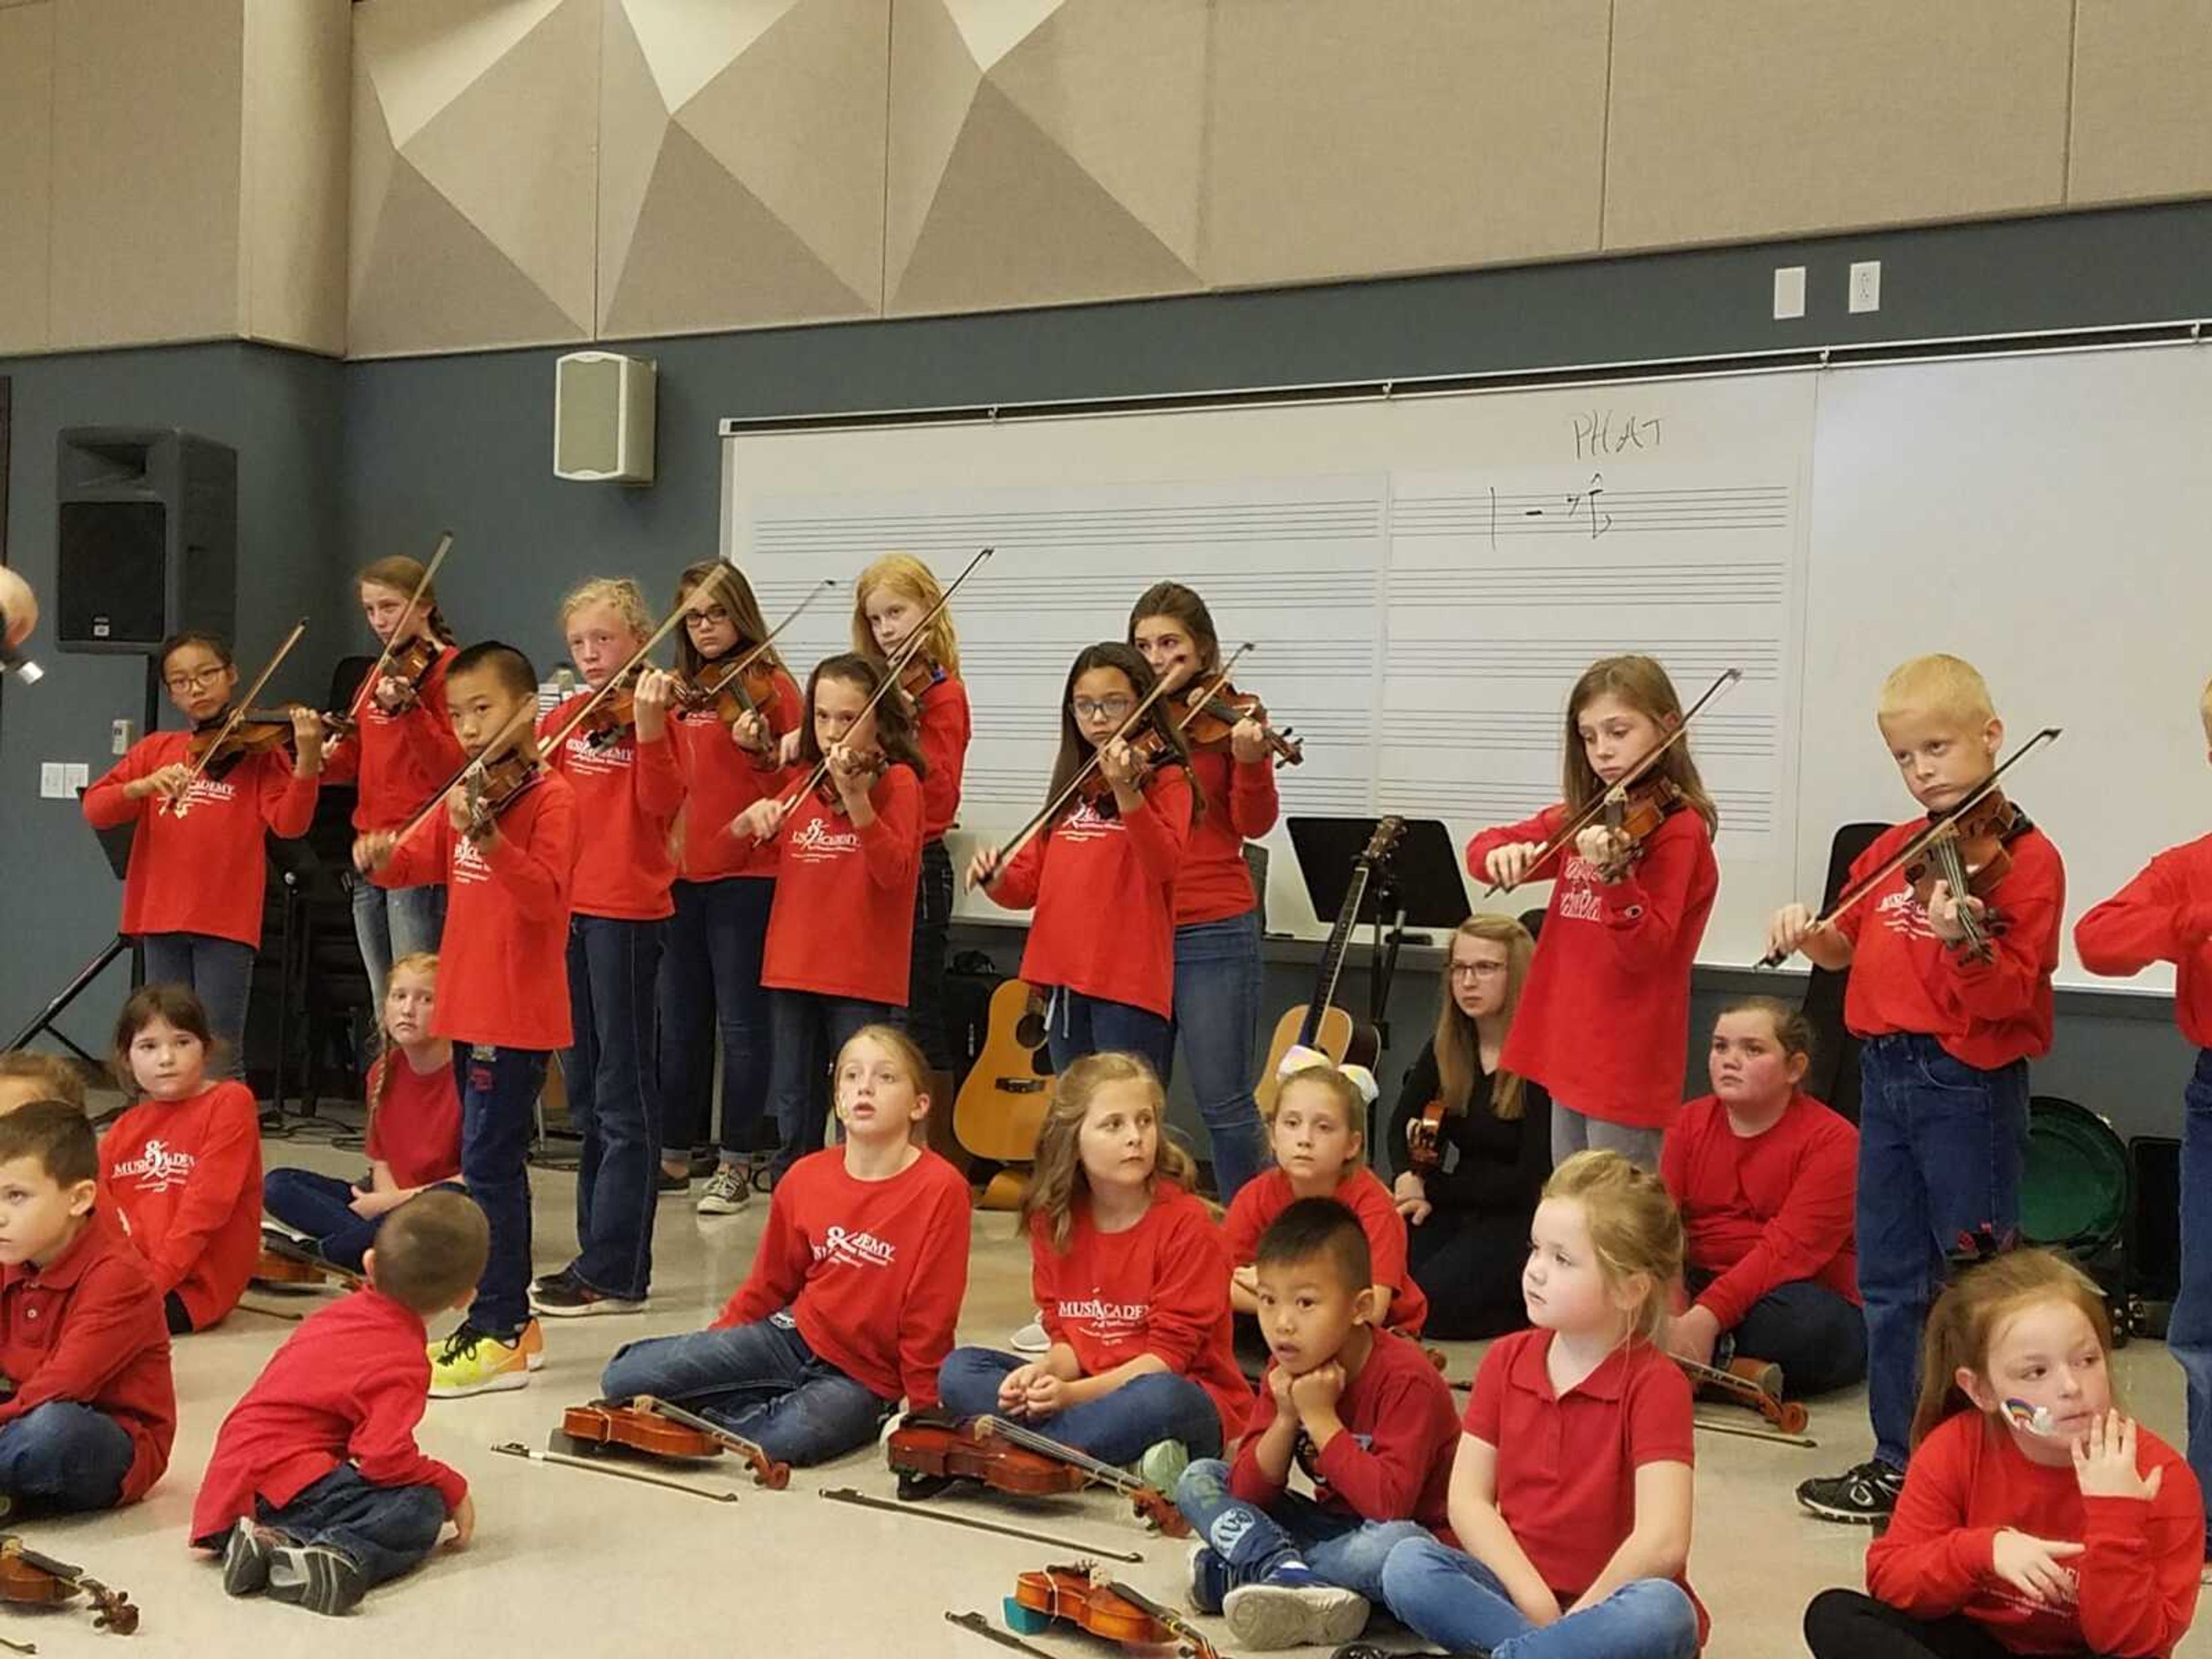 Southeast Music Academy held a family event Sunday, Oct. 22, to showcase their skills and encourage more involvement. Here, the Suzuki Strings class performs a recital for family and community members.